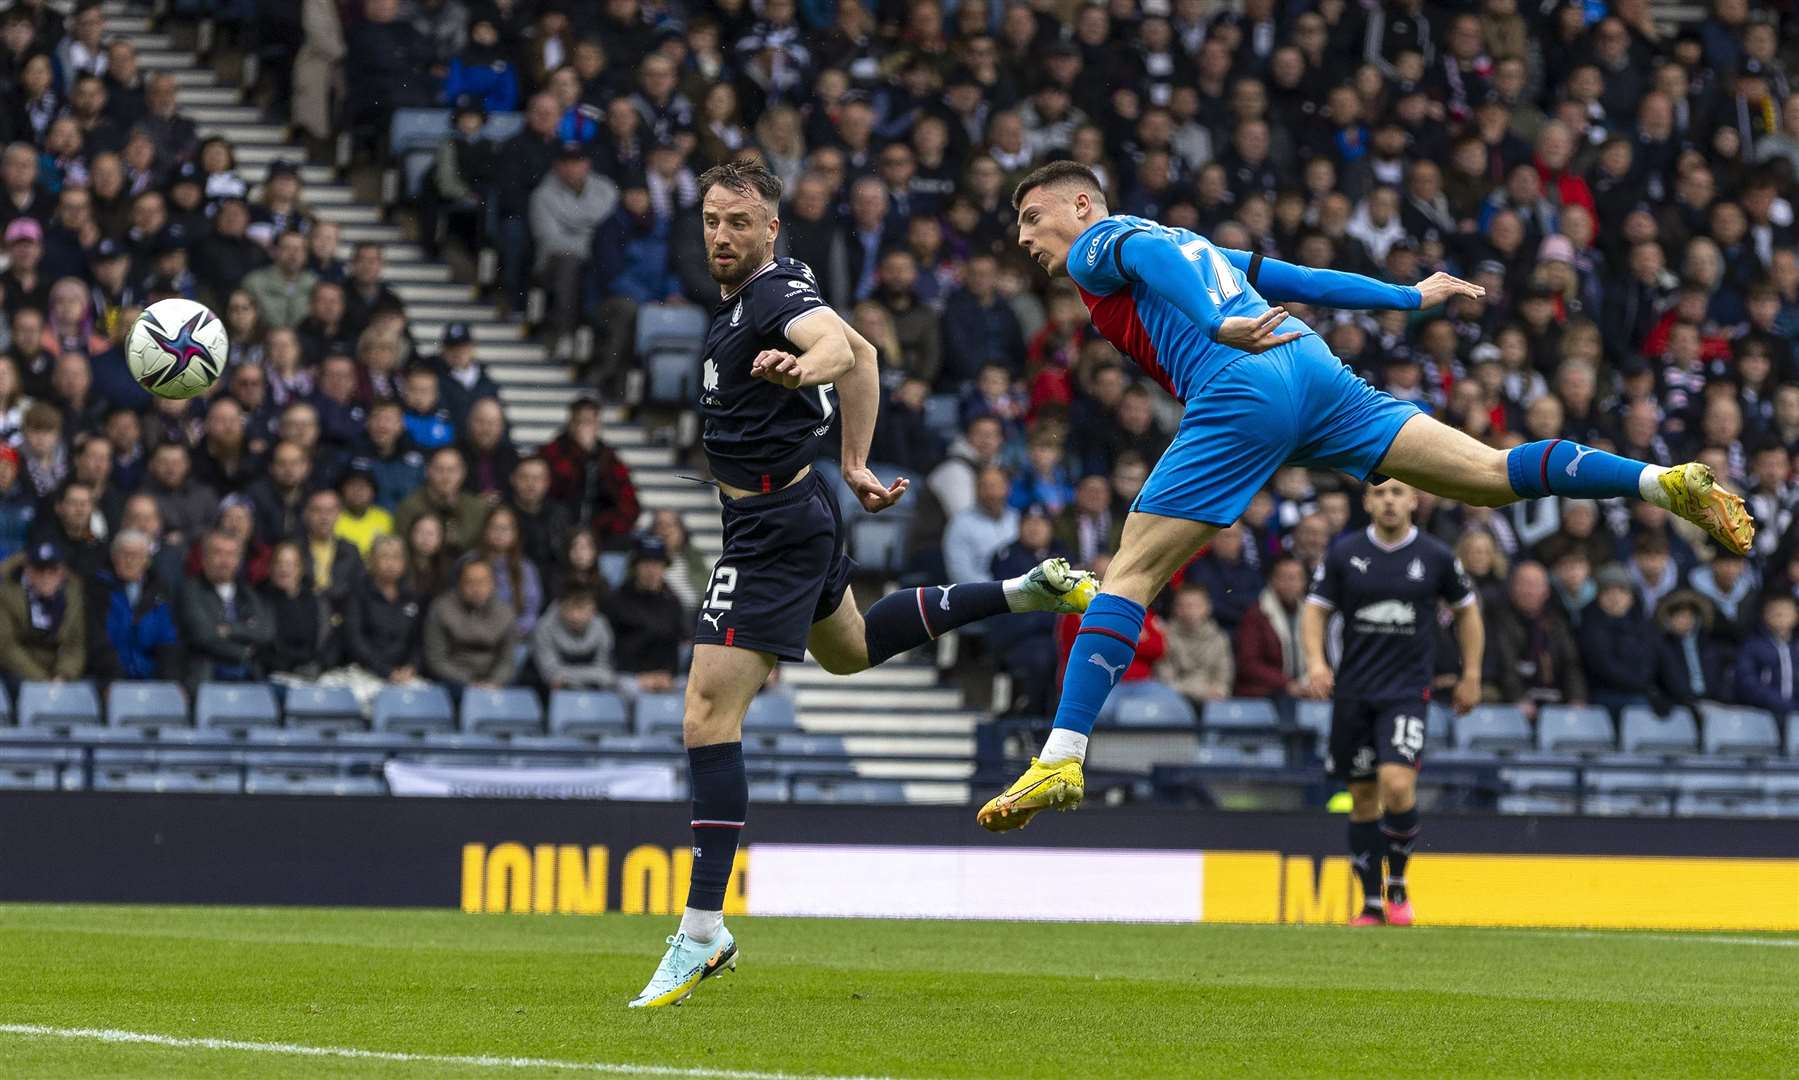 Daniel MacKay scored a header in a man of the match performance against Falkirk in the semi final. Picture: Ken Macpherson